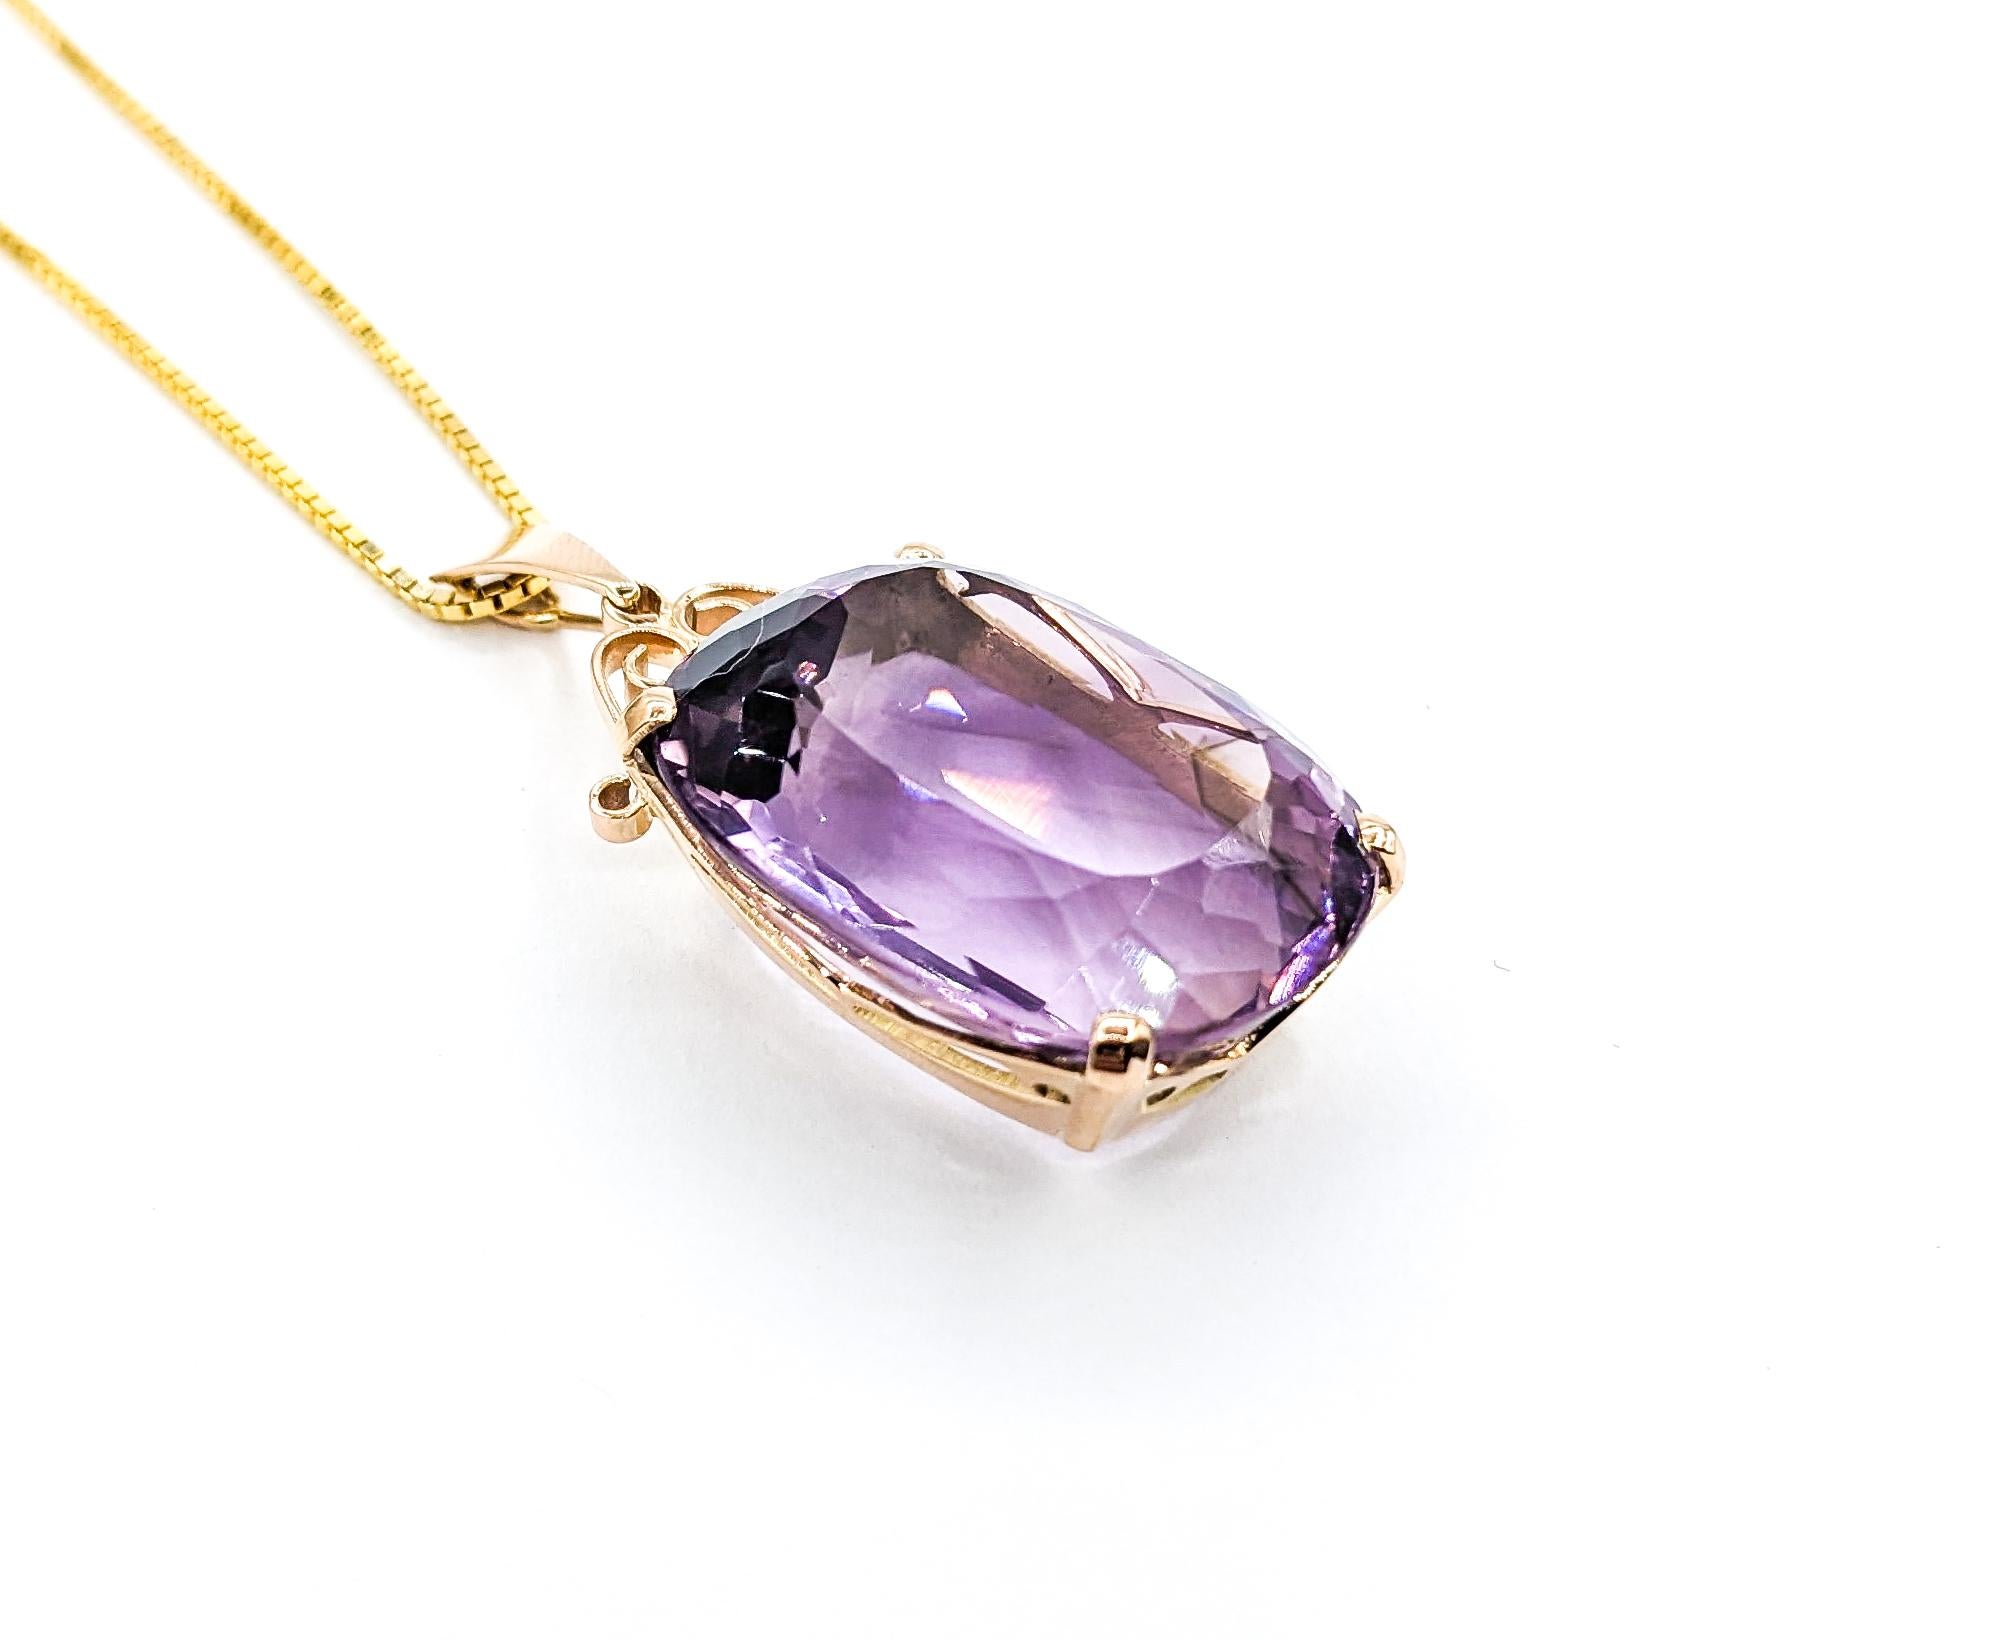 46ct Amethyst Pendant With Chain In Yellow Gold For Sale 2